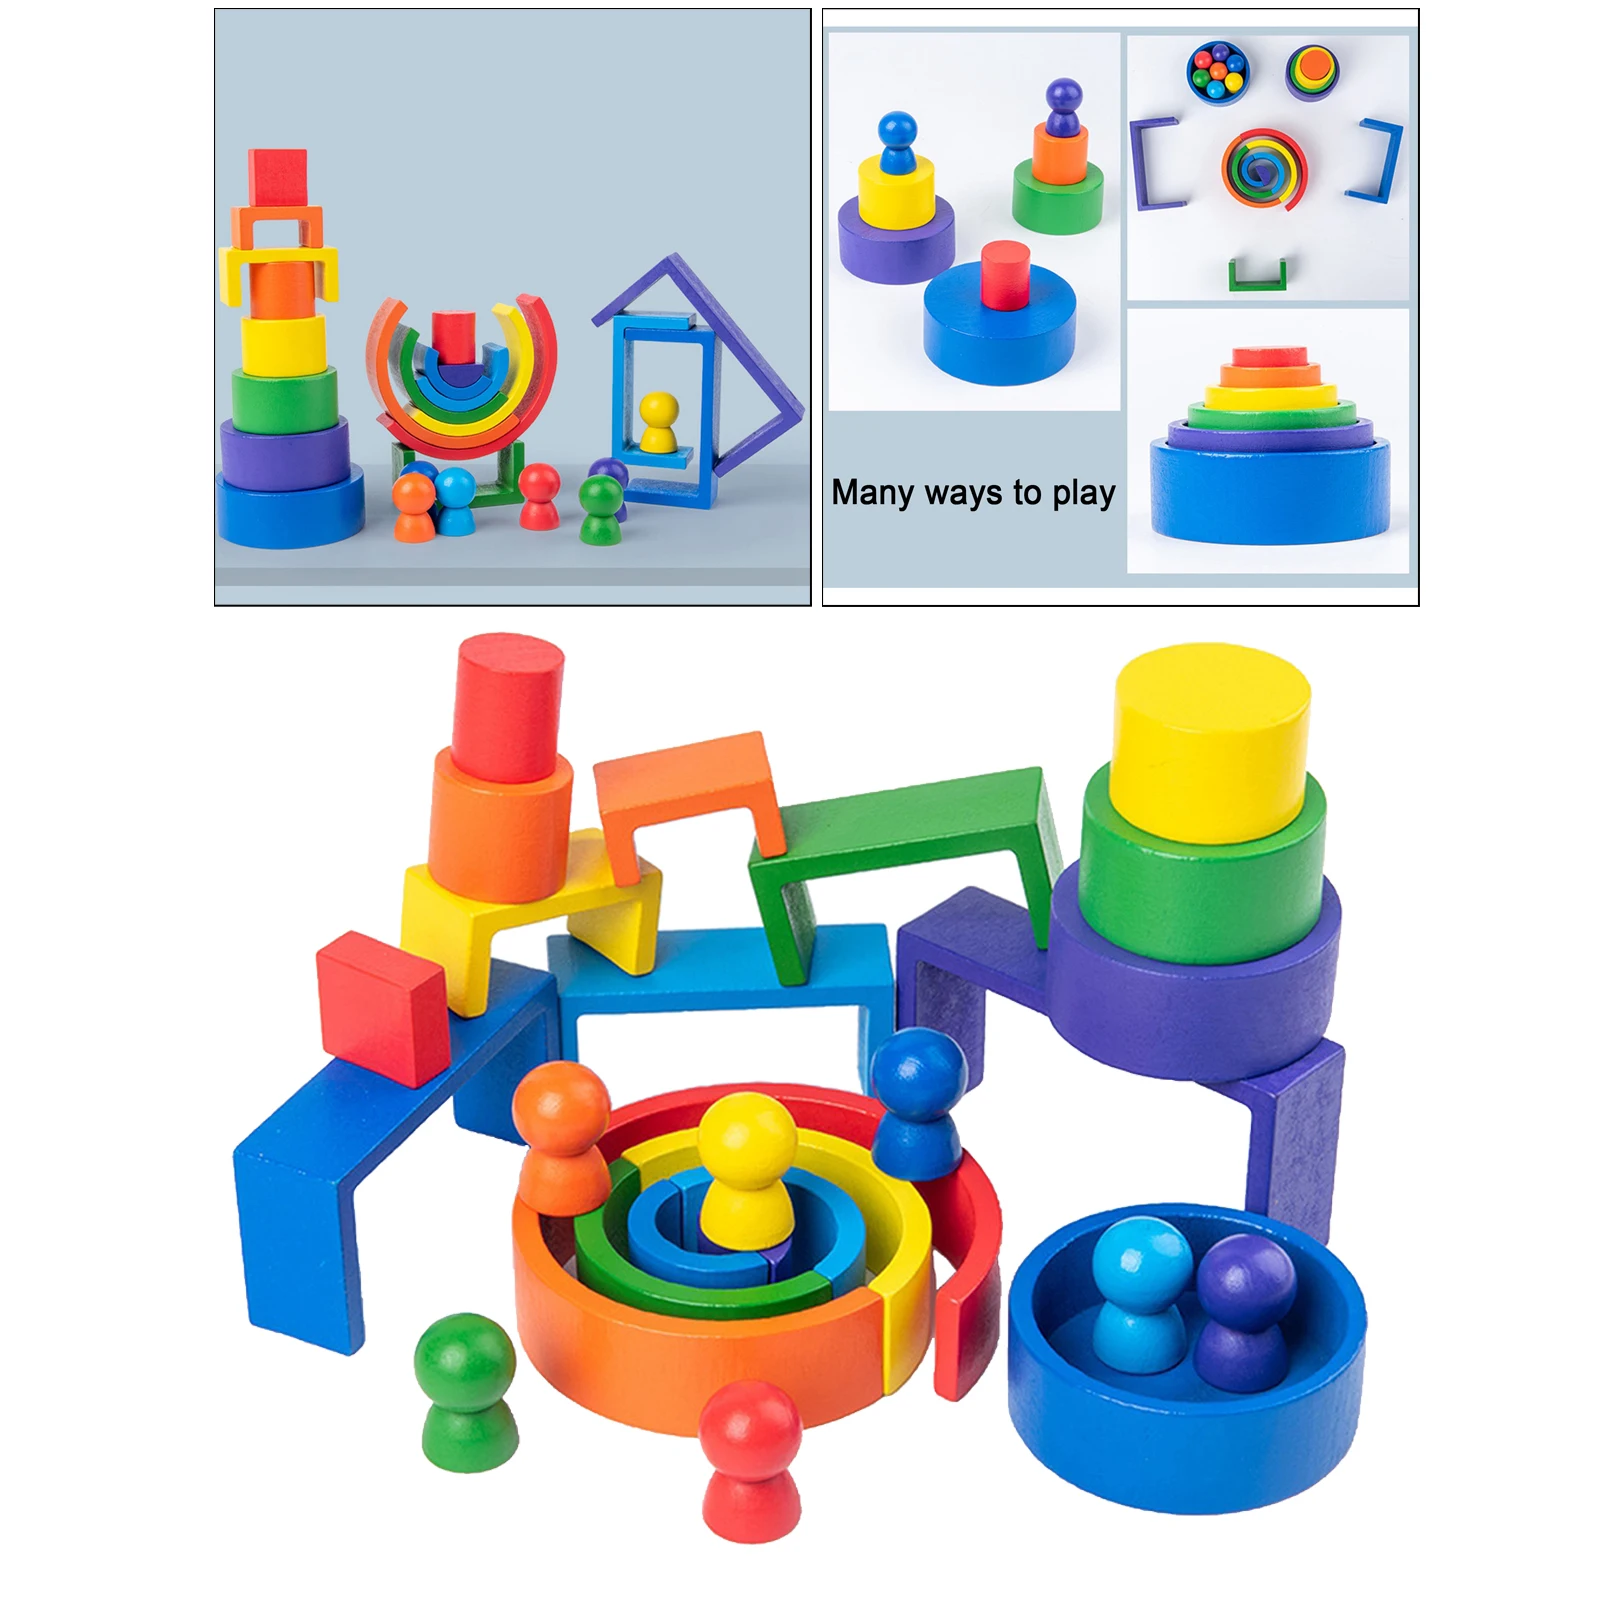 Color Shape Educational Puzzle of Rainbow Building Blocks Wooden Stacking Toy